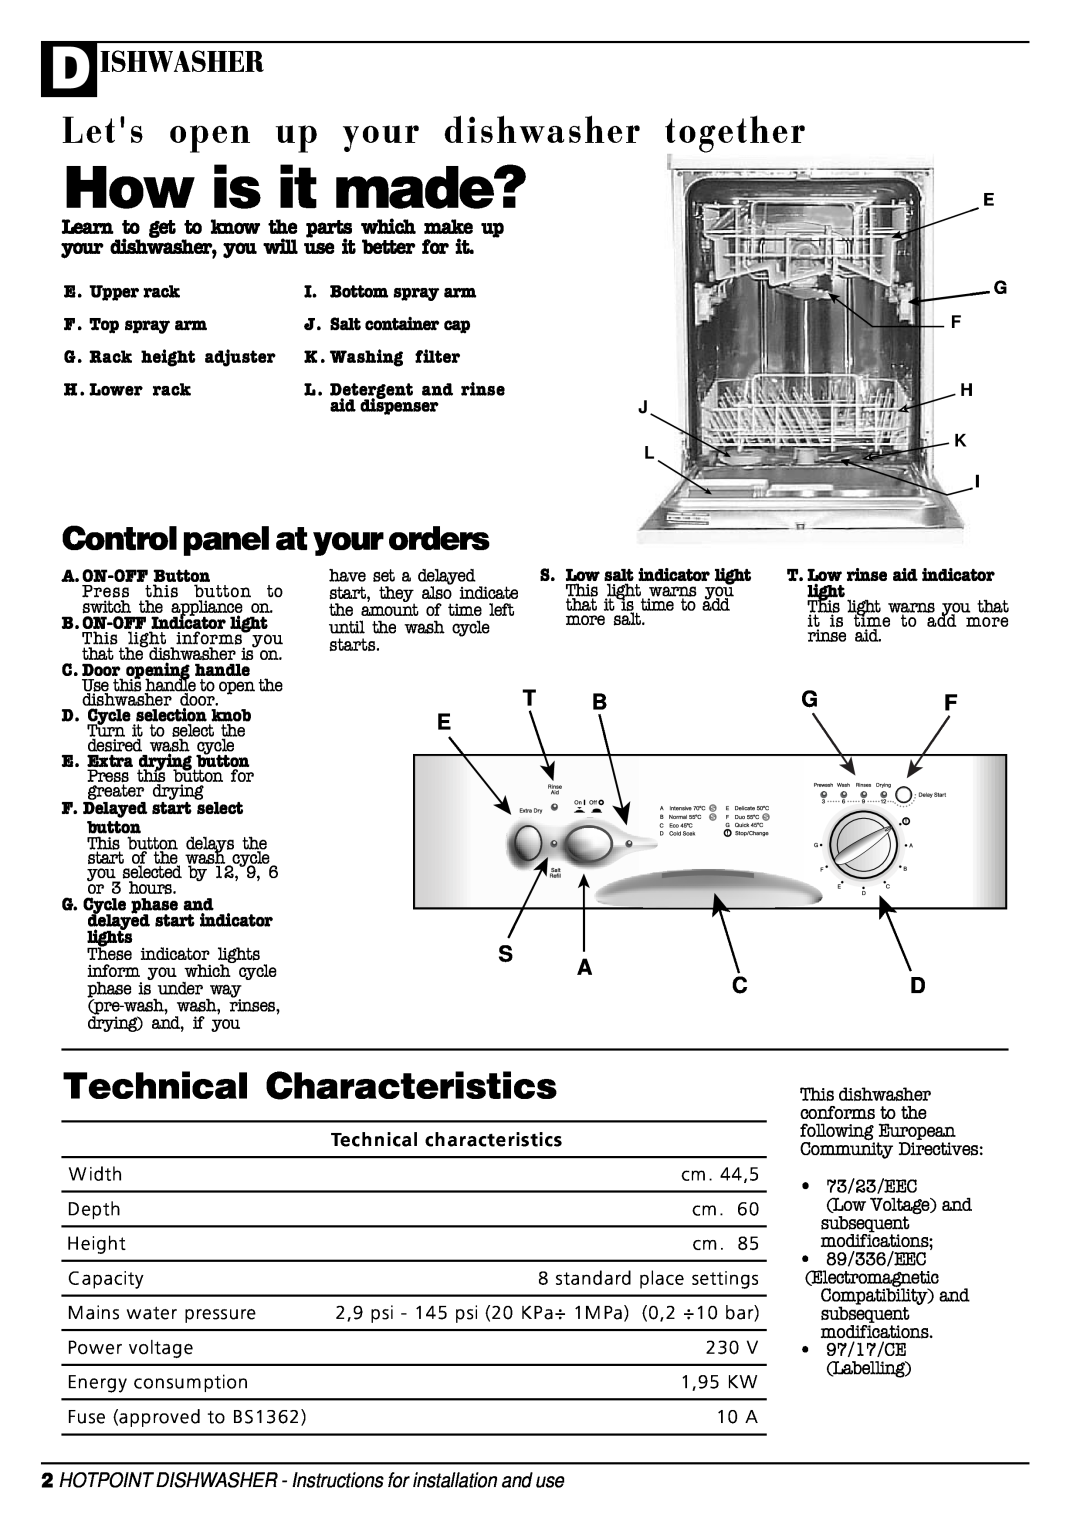 Hotpoint DC 28 manual How is it made?, Lets open up your dishwasher together, Technical Characteristics, Dishwasher, S A Cd 